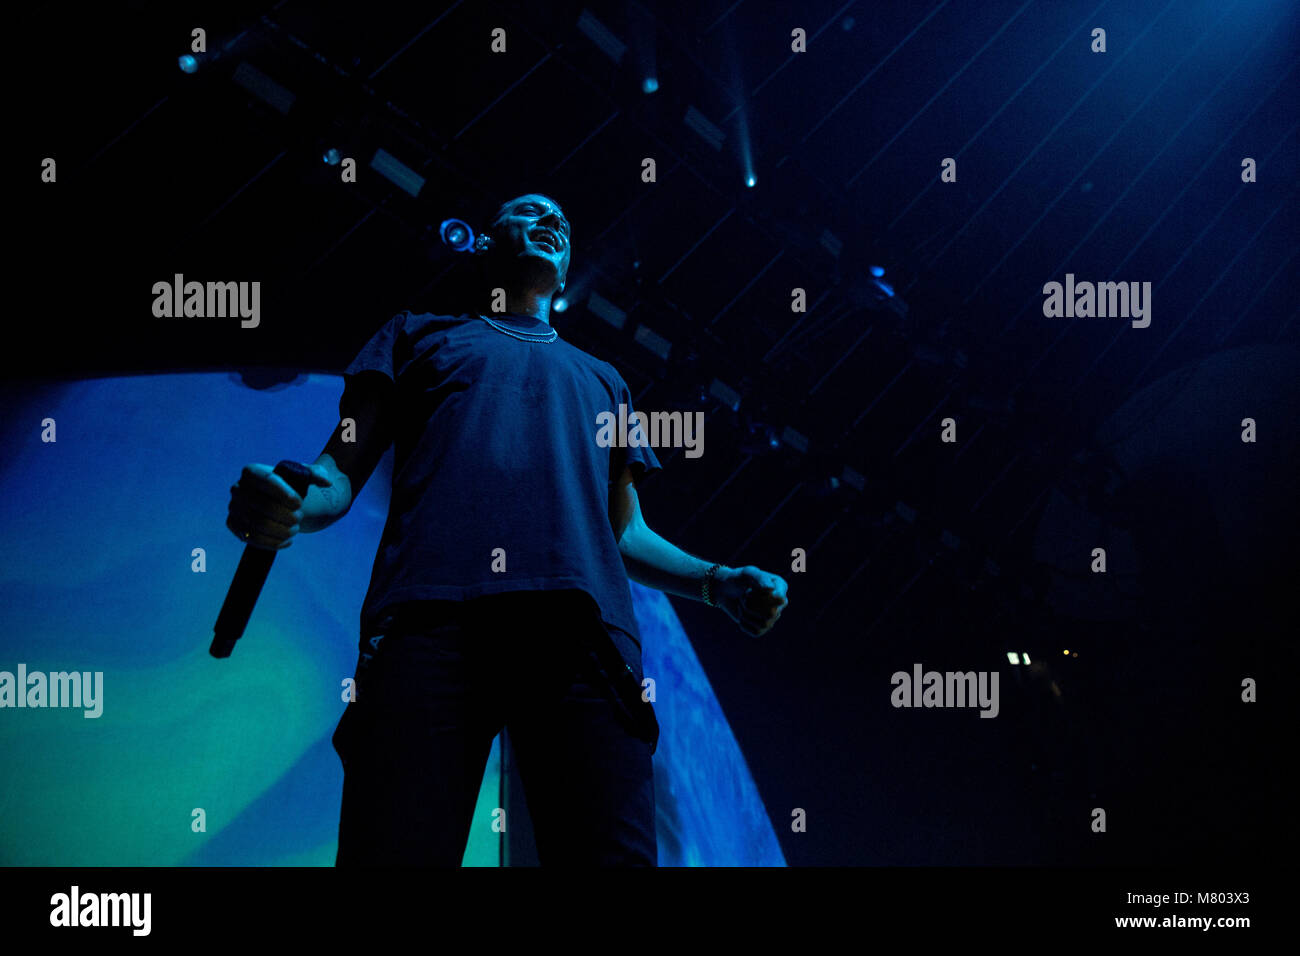 Toronto, CANADA. 13th Mar, 2018. G-Eazy performs the first of two sold out nights at Rebel Nightclub, part of his 'The Beautiful & Damned Tour' in Toronto, Canada. Credit: Bobby Singh/Alamy Live News. Stock Photo